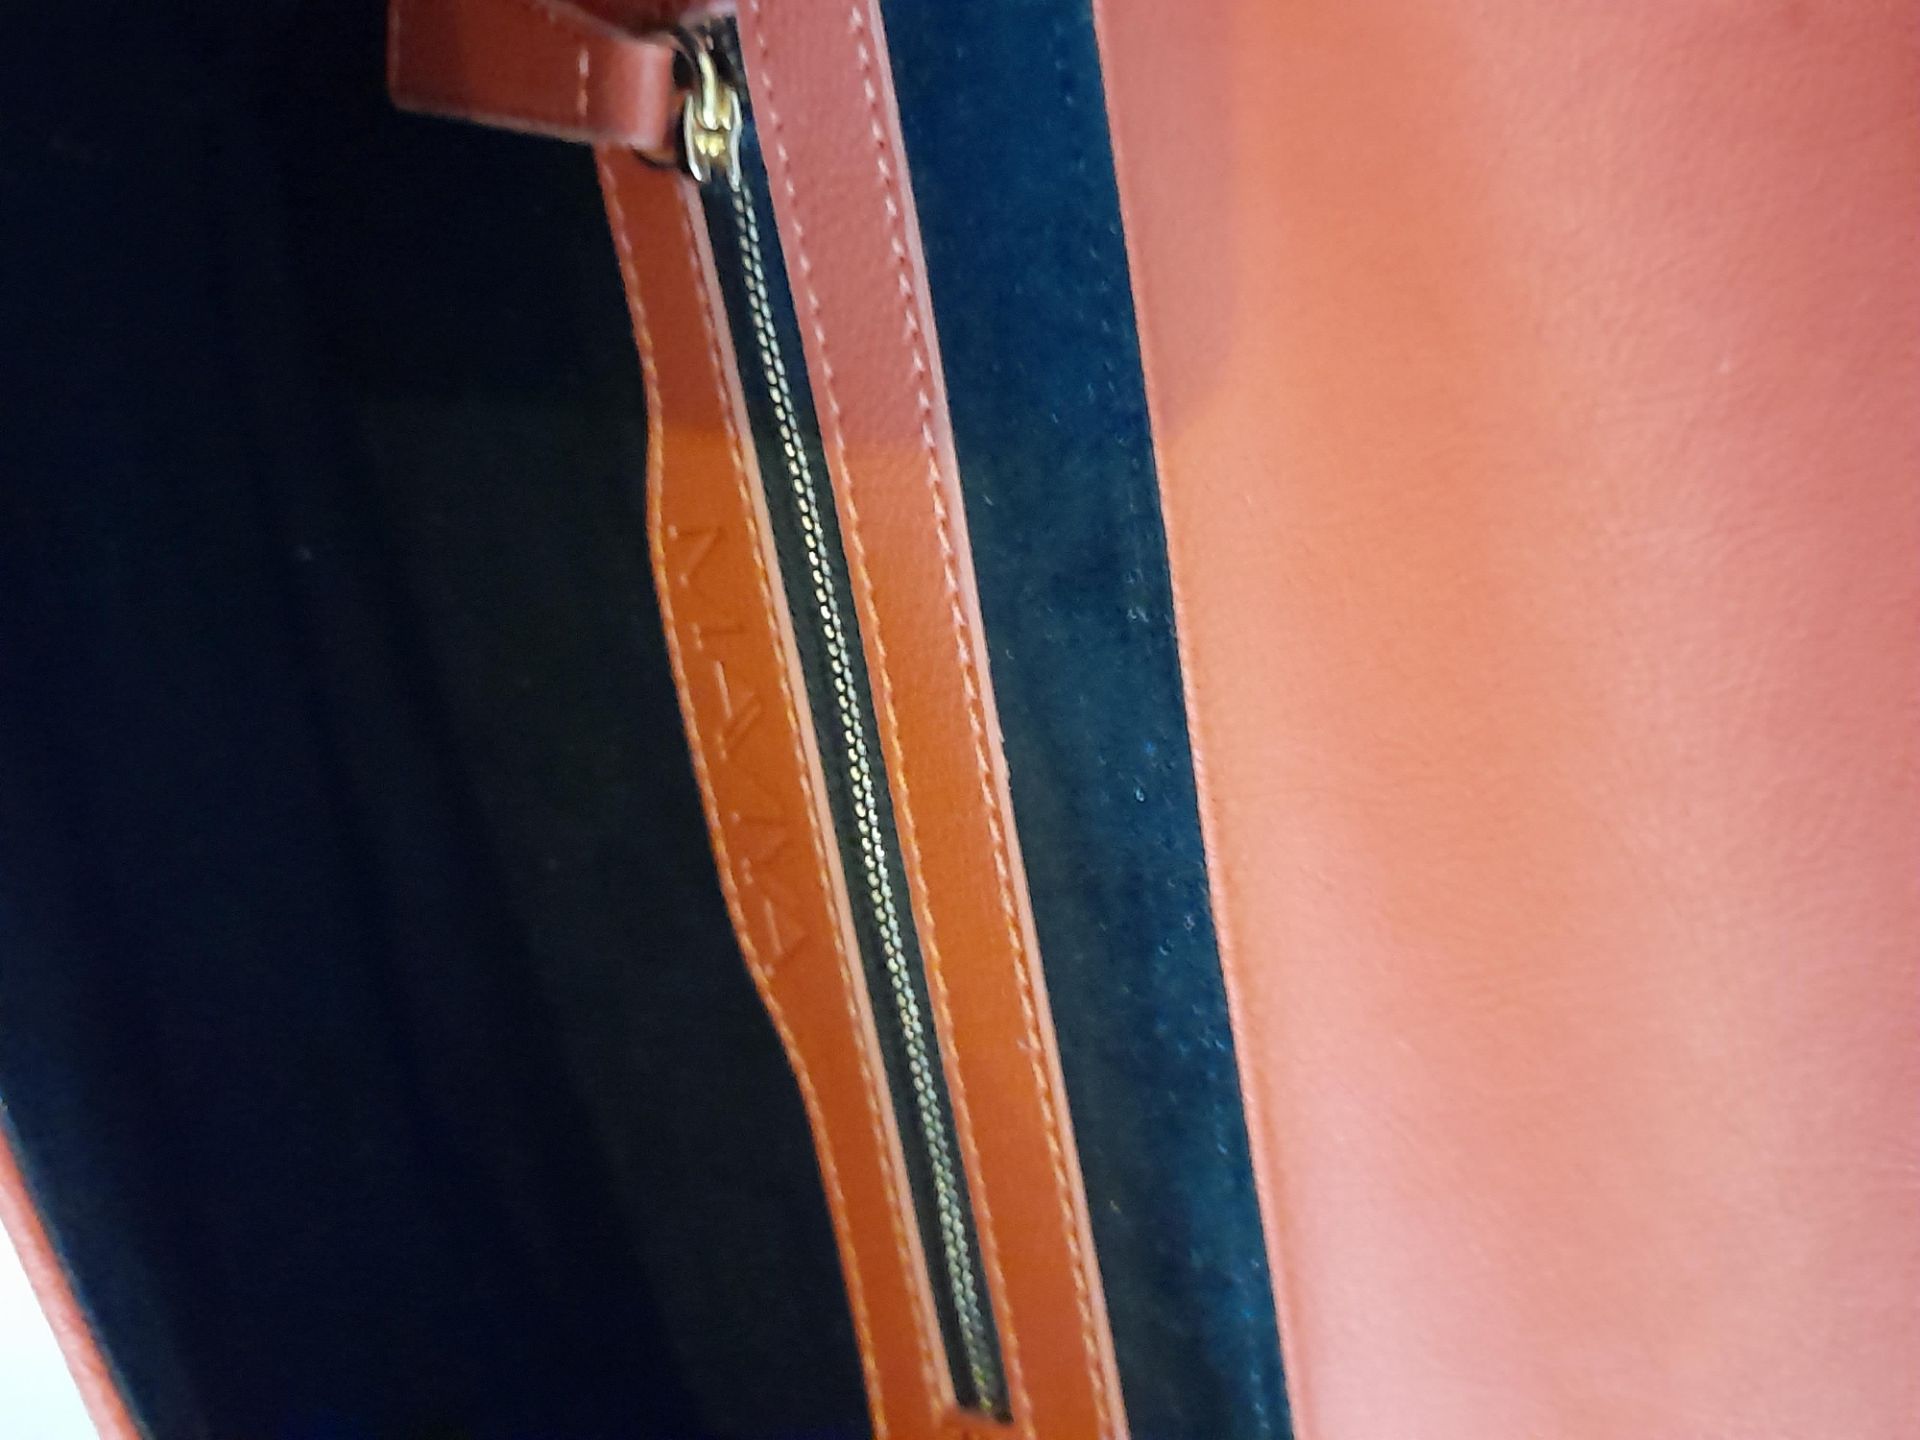 Maviya “Zenn” Vegan Italian Leather Cross Body Bag with Smooth Soft Finish, Faux Suede Lining and - Image 3 of 3